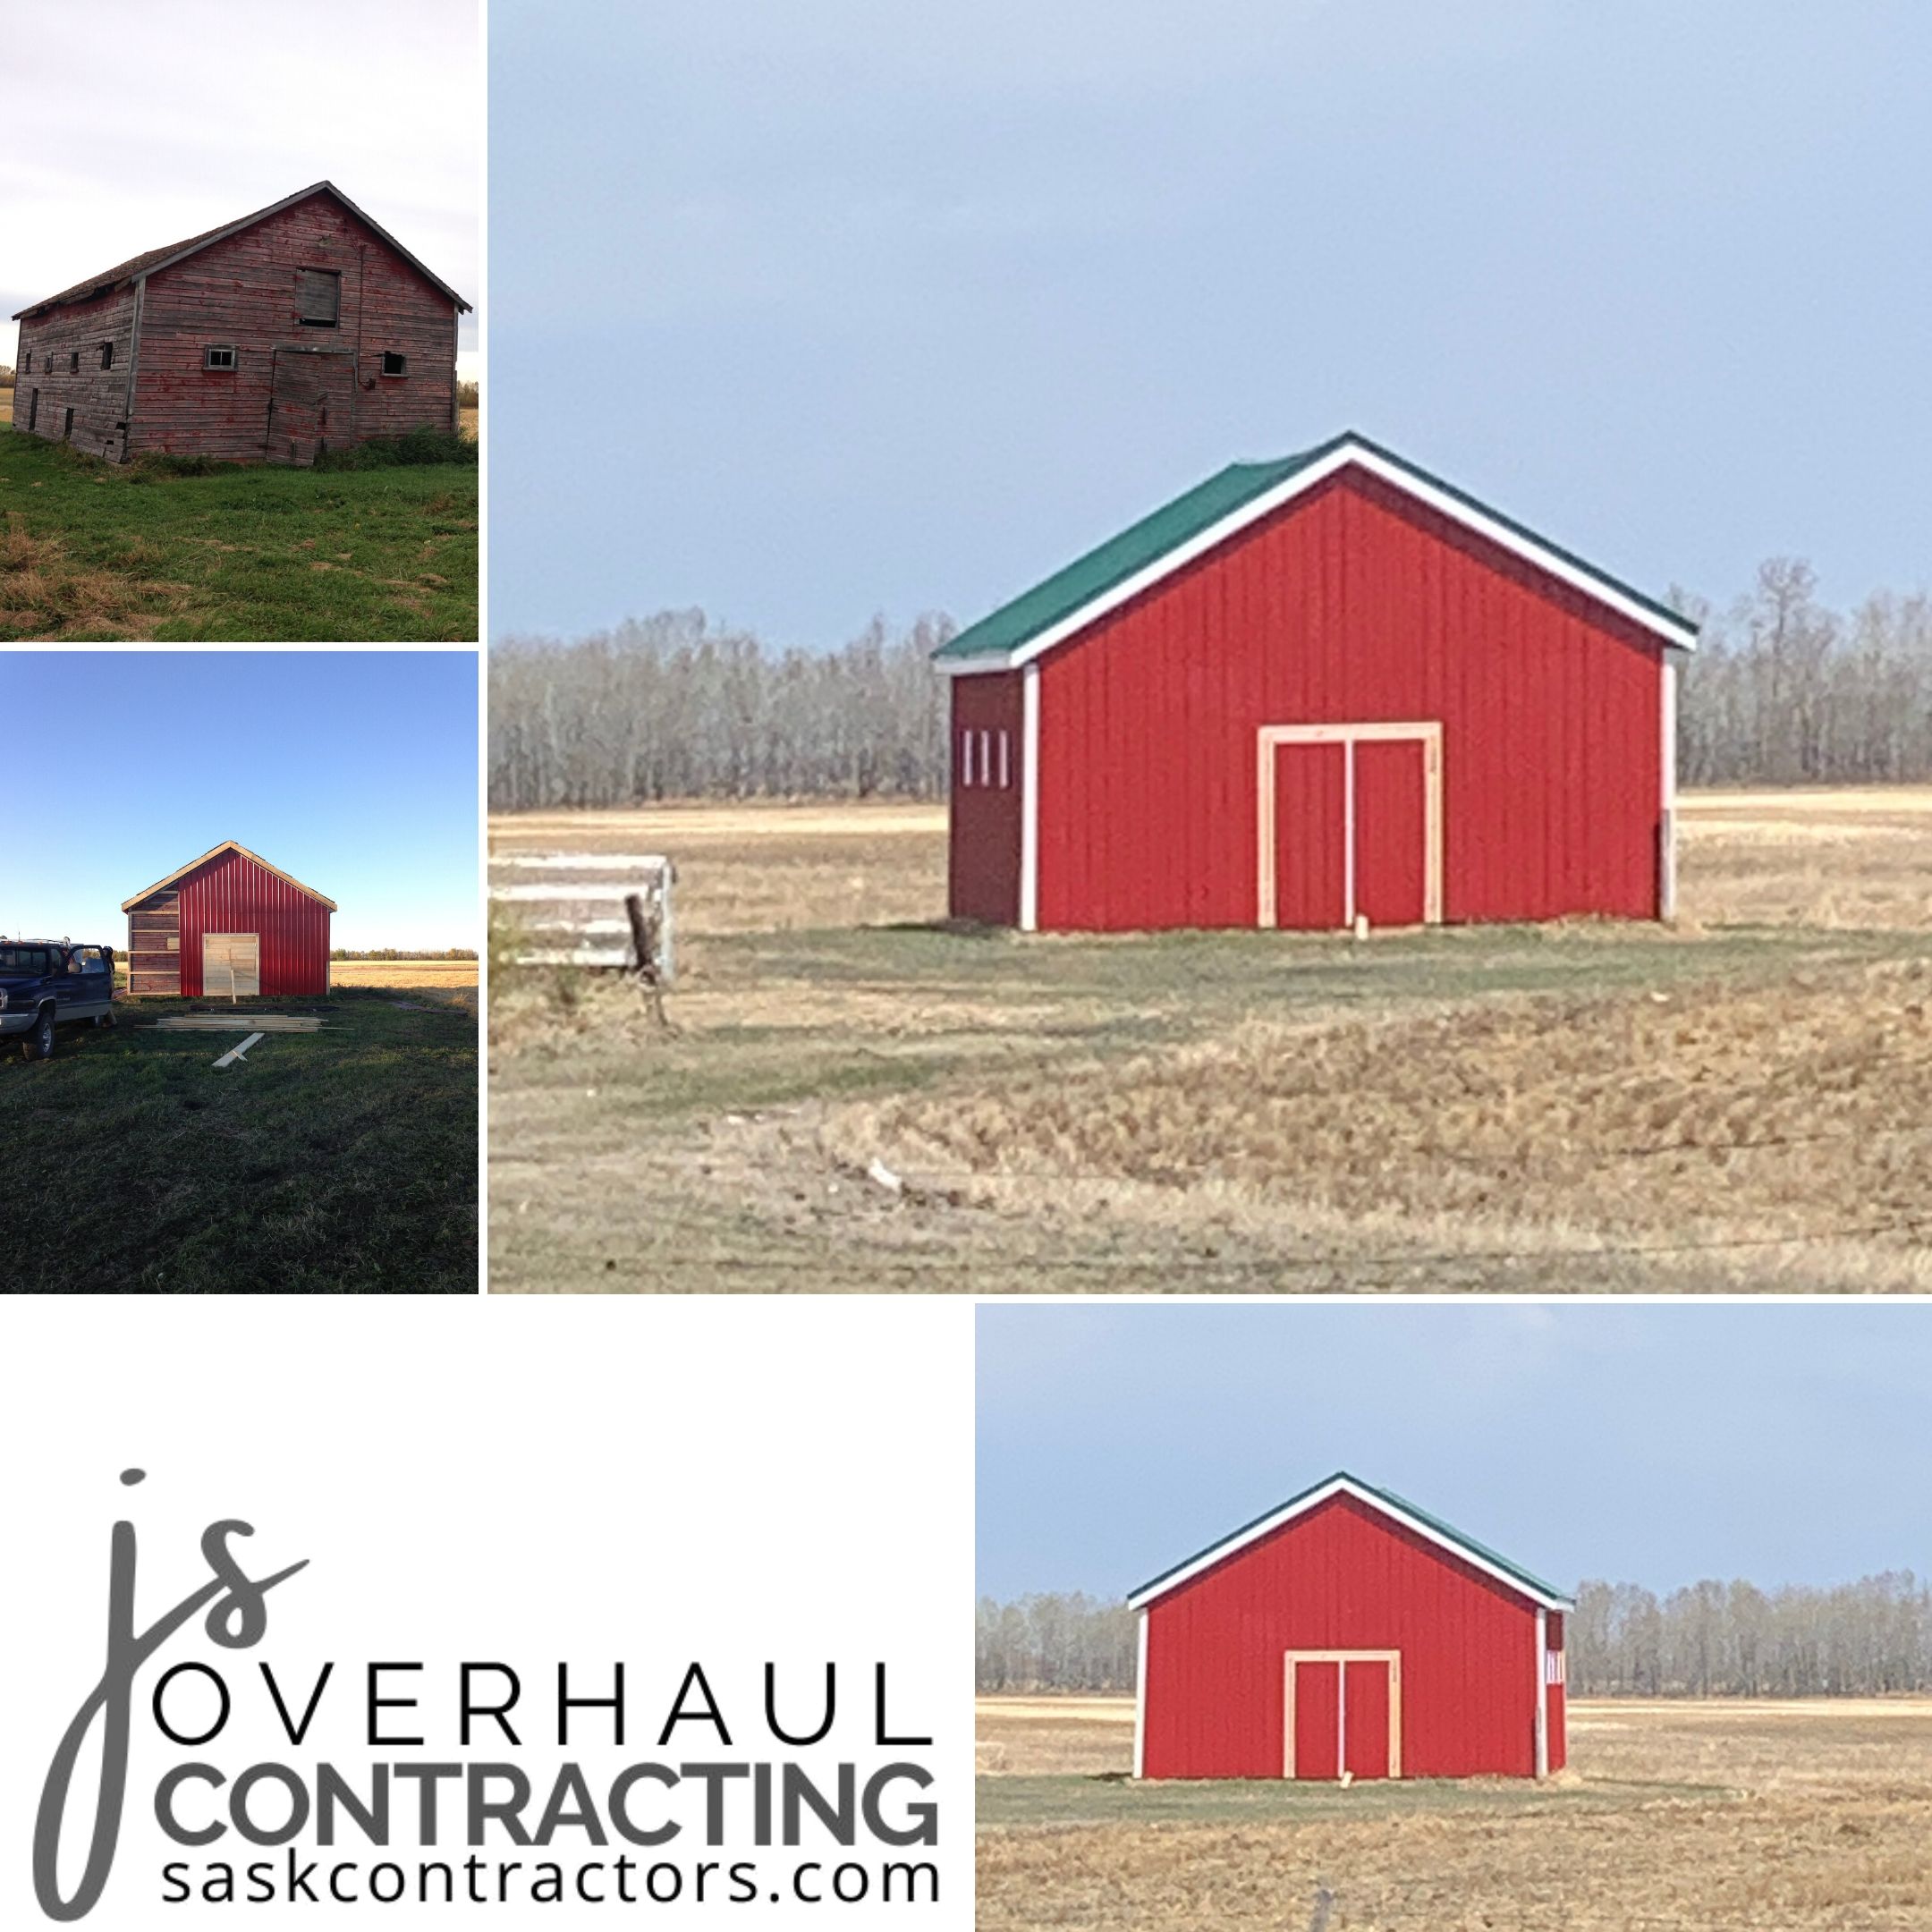 This barn overhaul included straightening, replacing windows and doors. Completed with metal exterior sheeting and roofing, soffit and fascia.